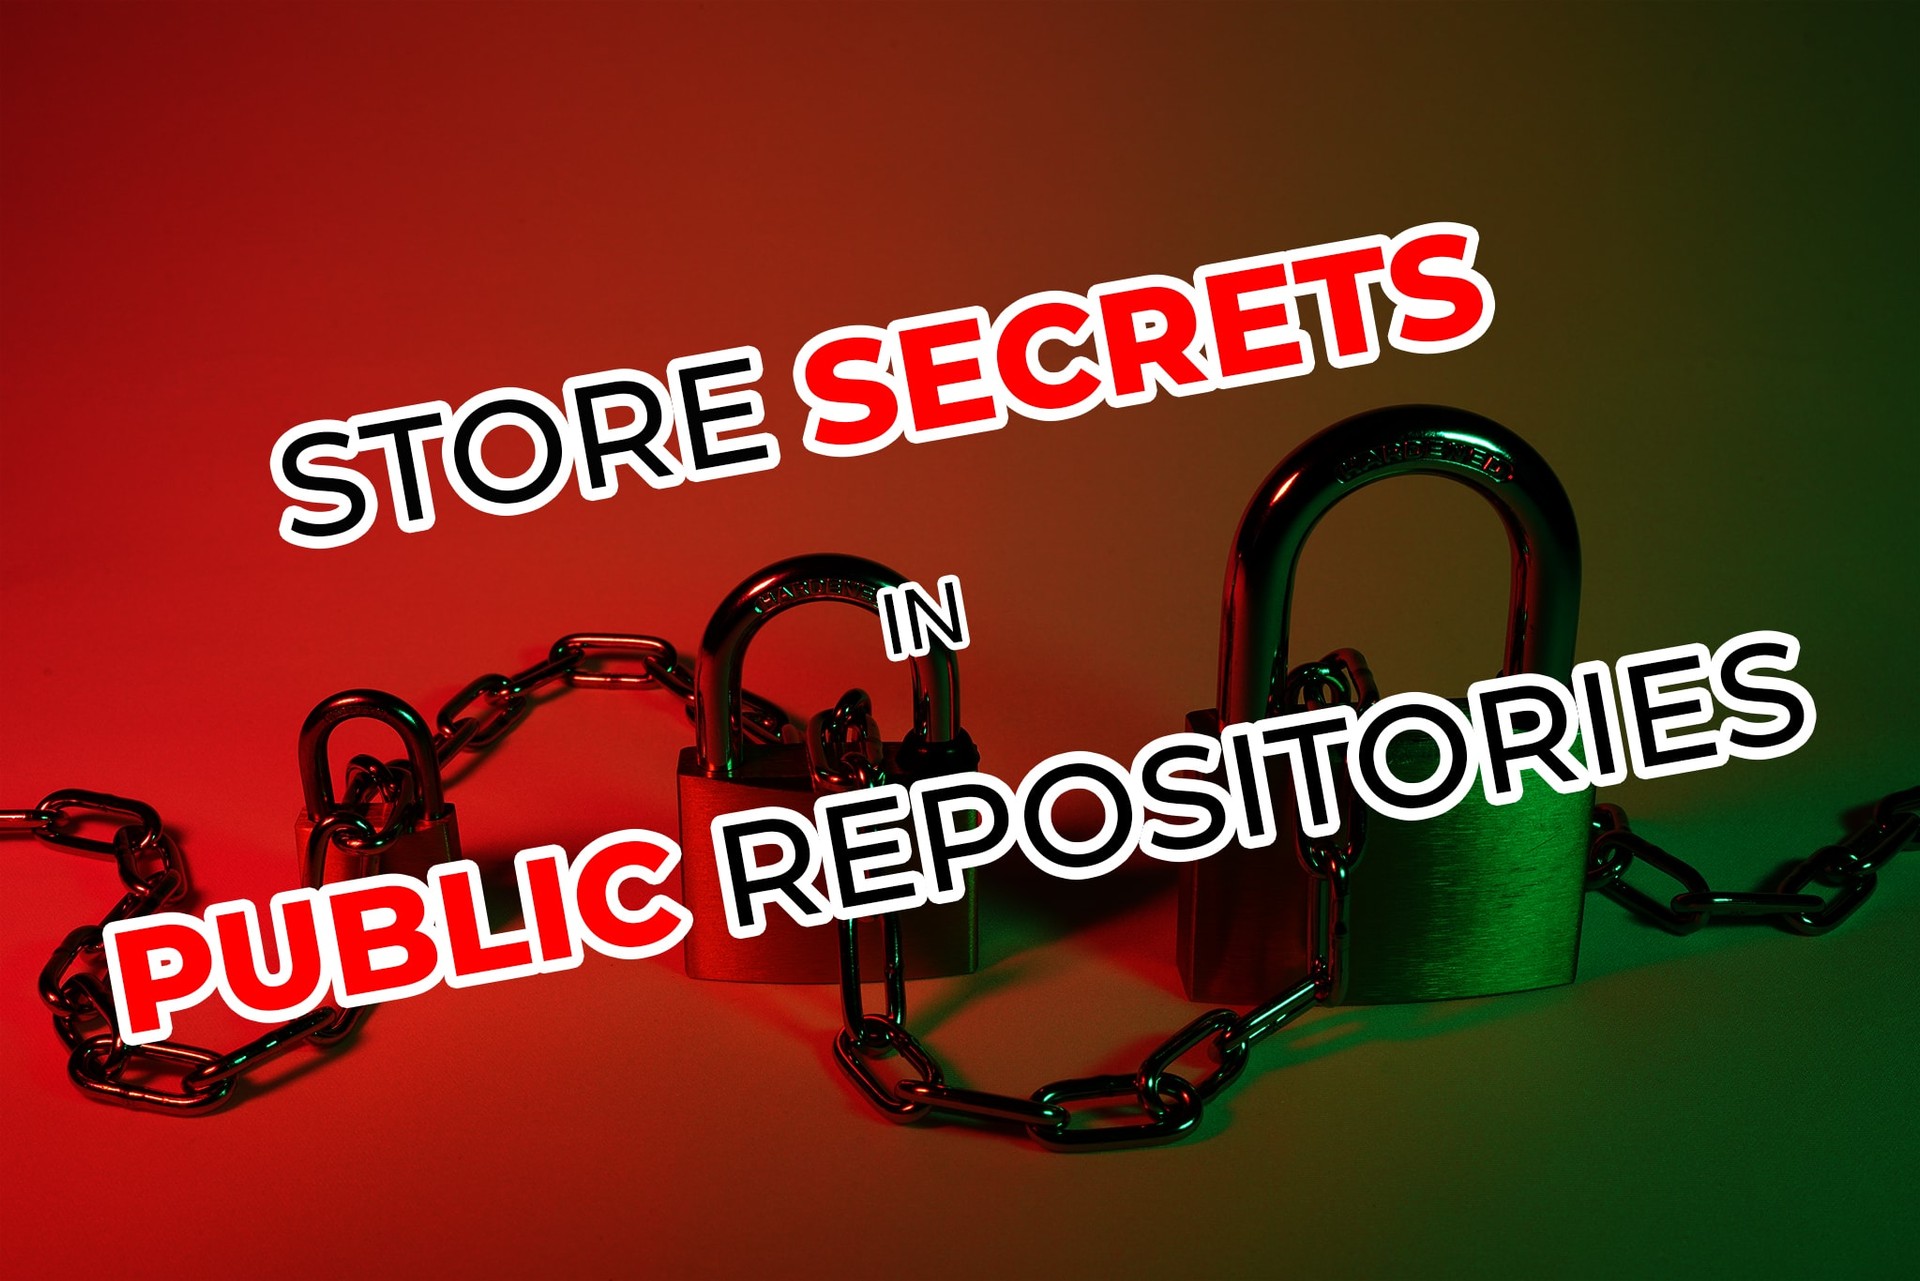 How to store secrets in public repositories